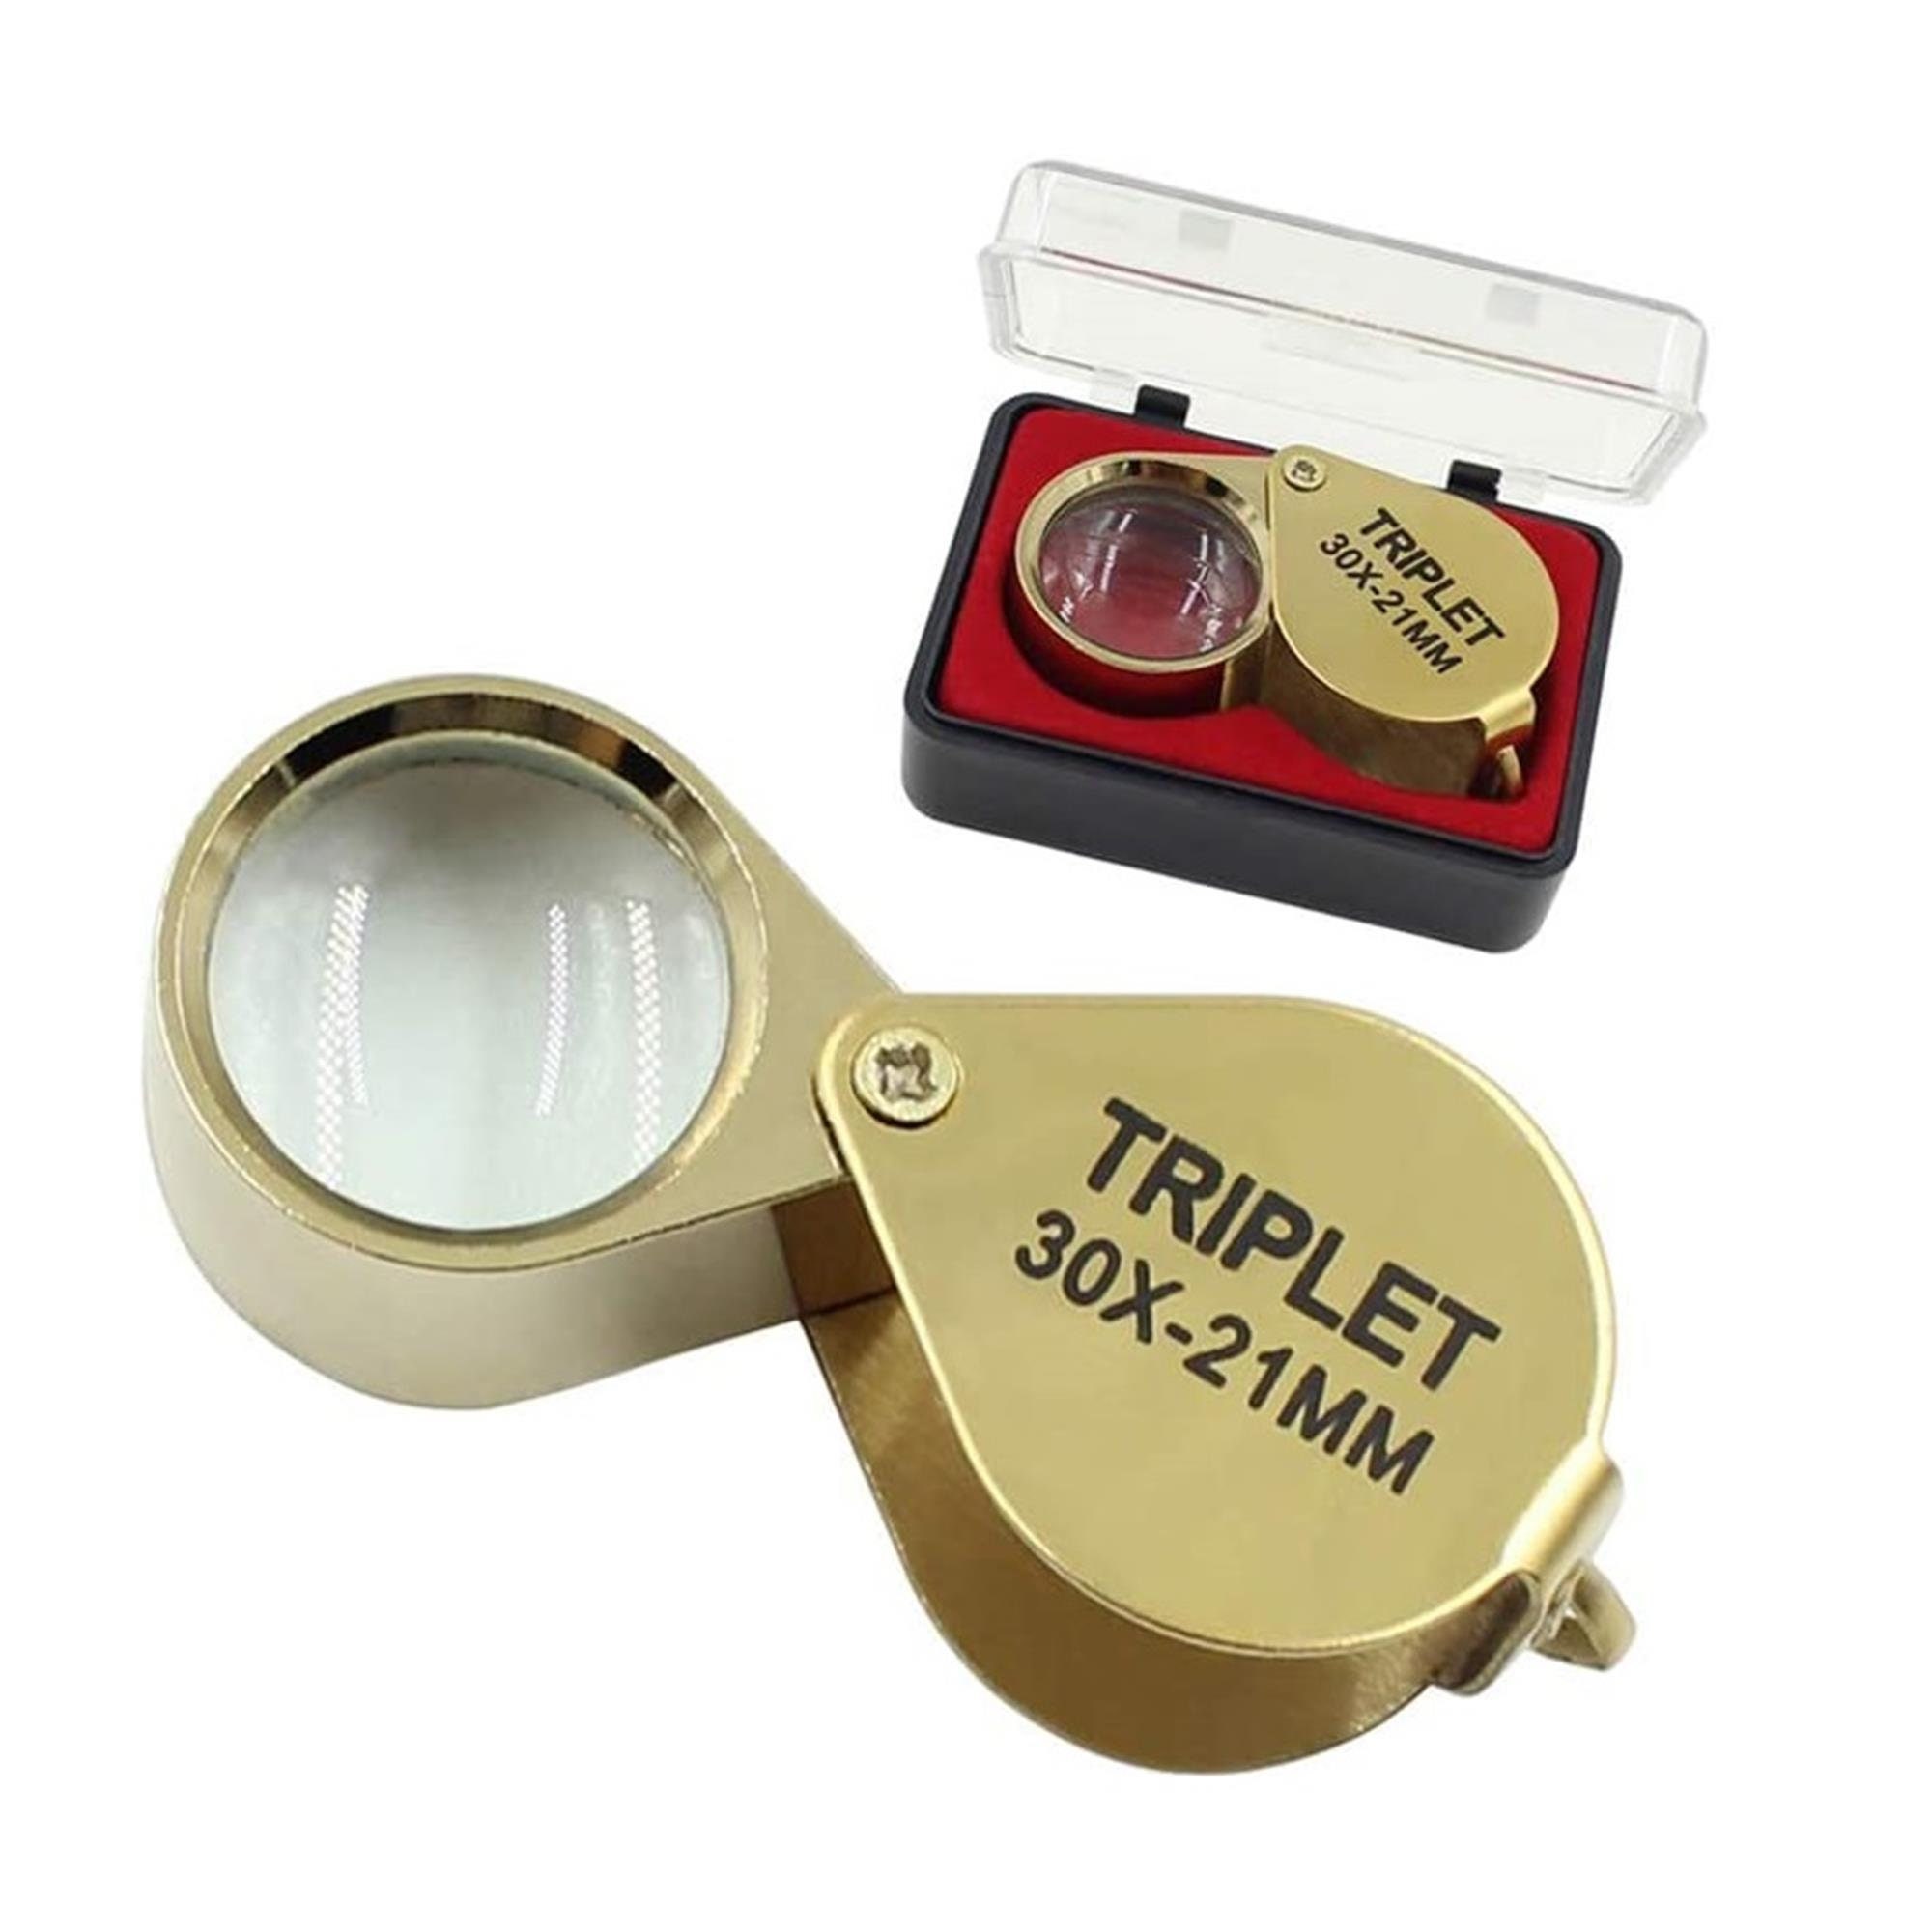 JEWELERS Magnifying LOUPE 30x 30 Power 21mm Triplet Lens Silver Finish MAGNIFY  Glass for Jewelry Magnify Jewelry Art Stamps Coins Geology 